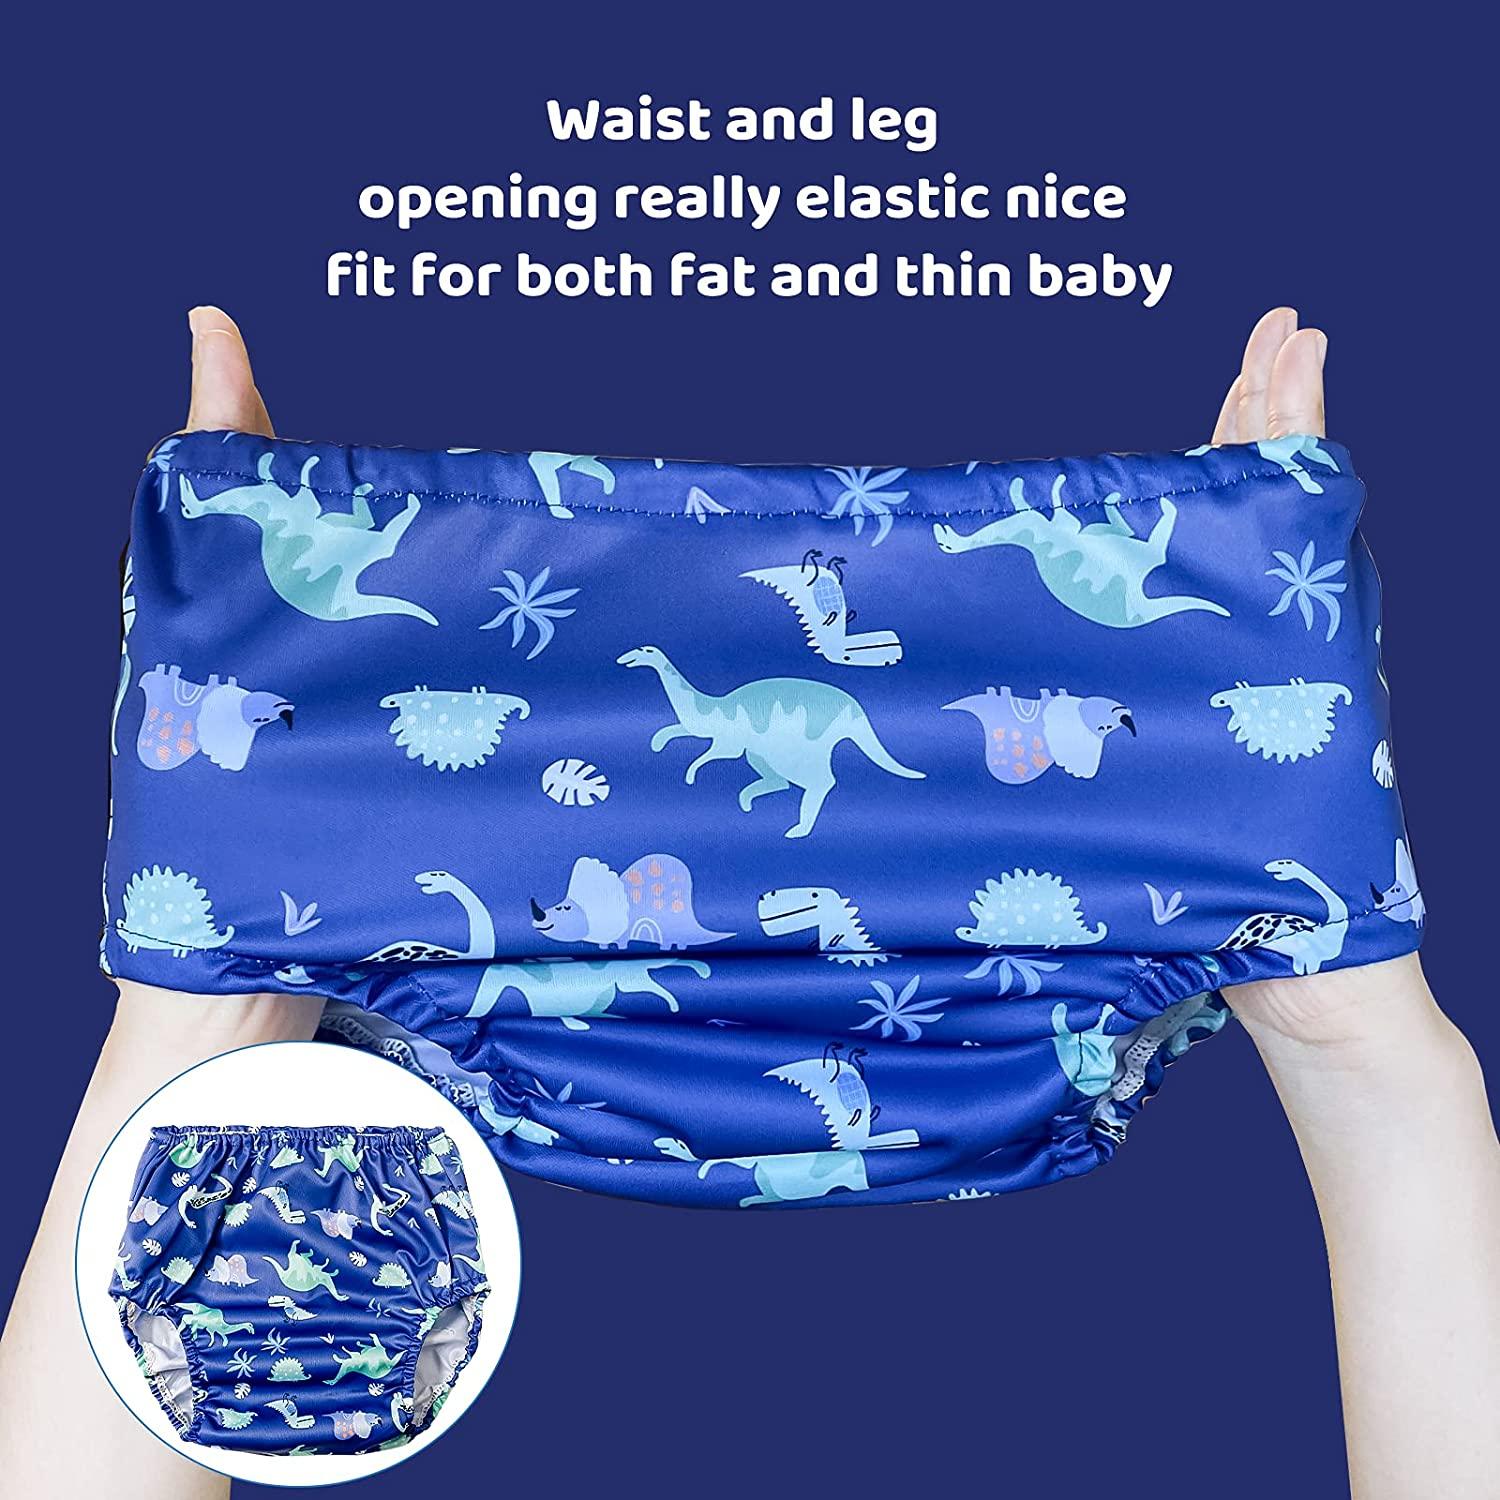 Rubber Pants Plastic Diaper Covers Toddler Plastic Underwear Covers for  Potty Training Rubber Pants for Toddlers Plastic Pants Rubber Training Pants  for Toddlers Plastic Training Pants 2t 